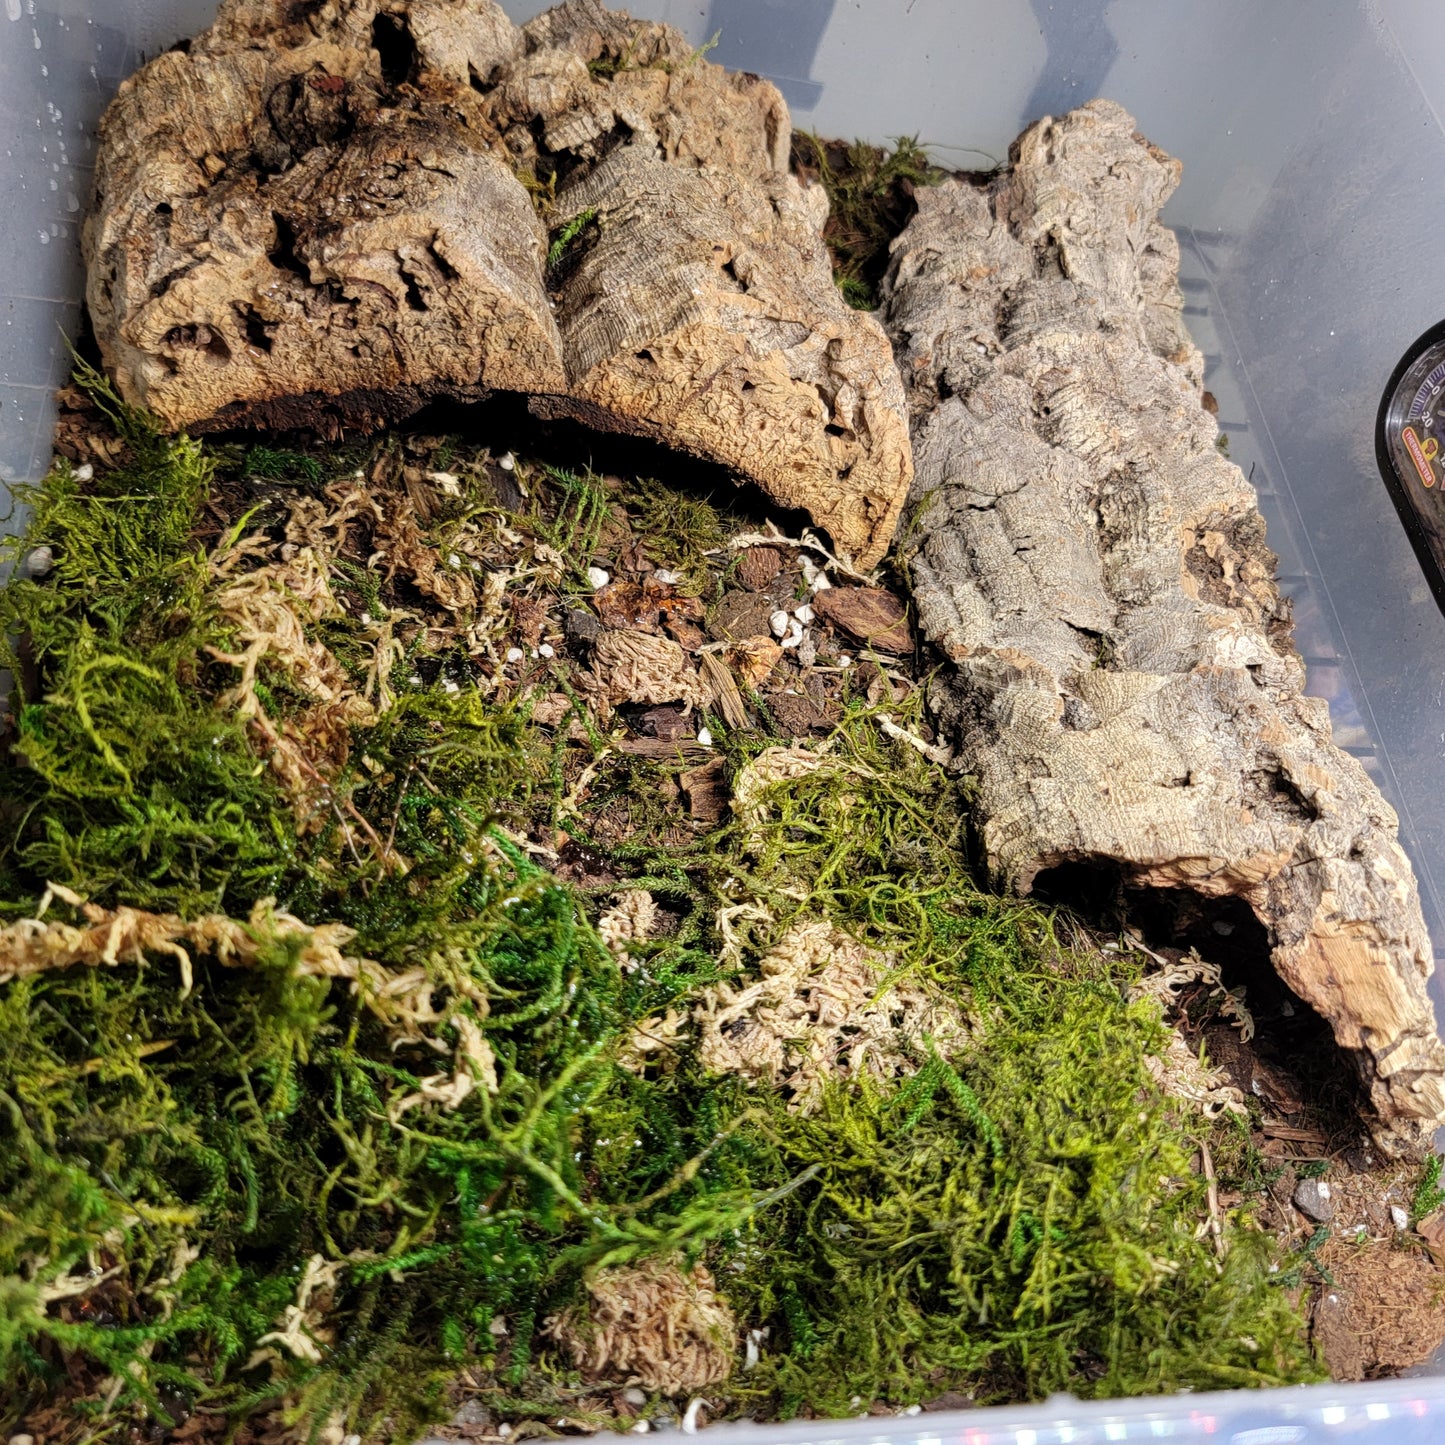 Isopod And Springtail Culture Starter Kit | 2 Different Sizes | 12"x7"/16"X13" | 6 QT/15QT | Enclosure | The Critters Cave